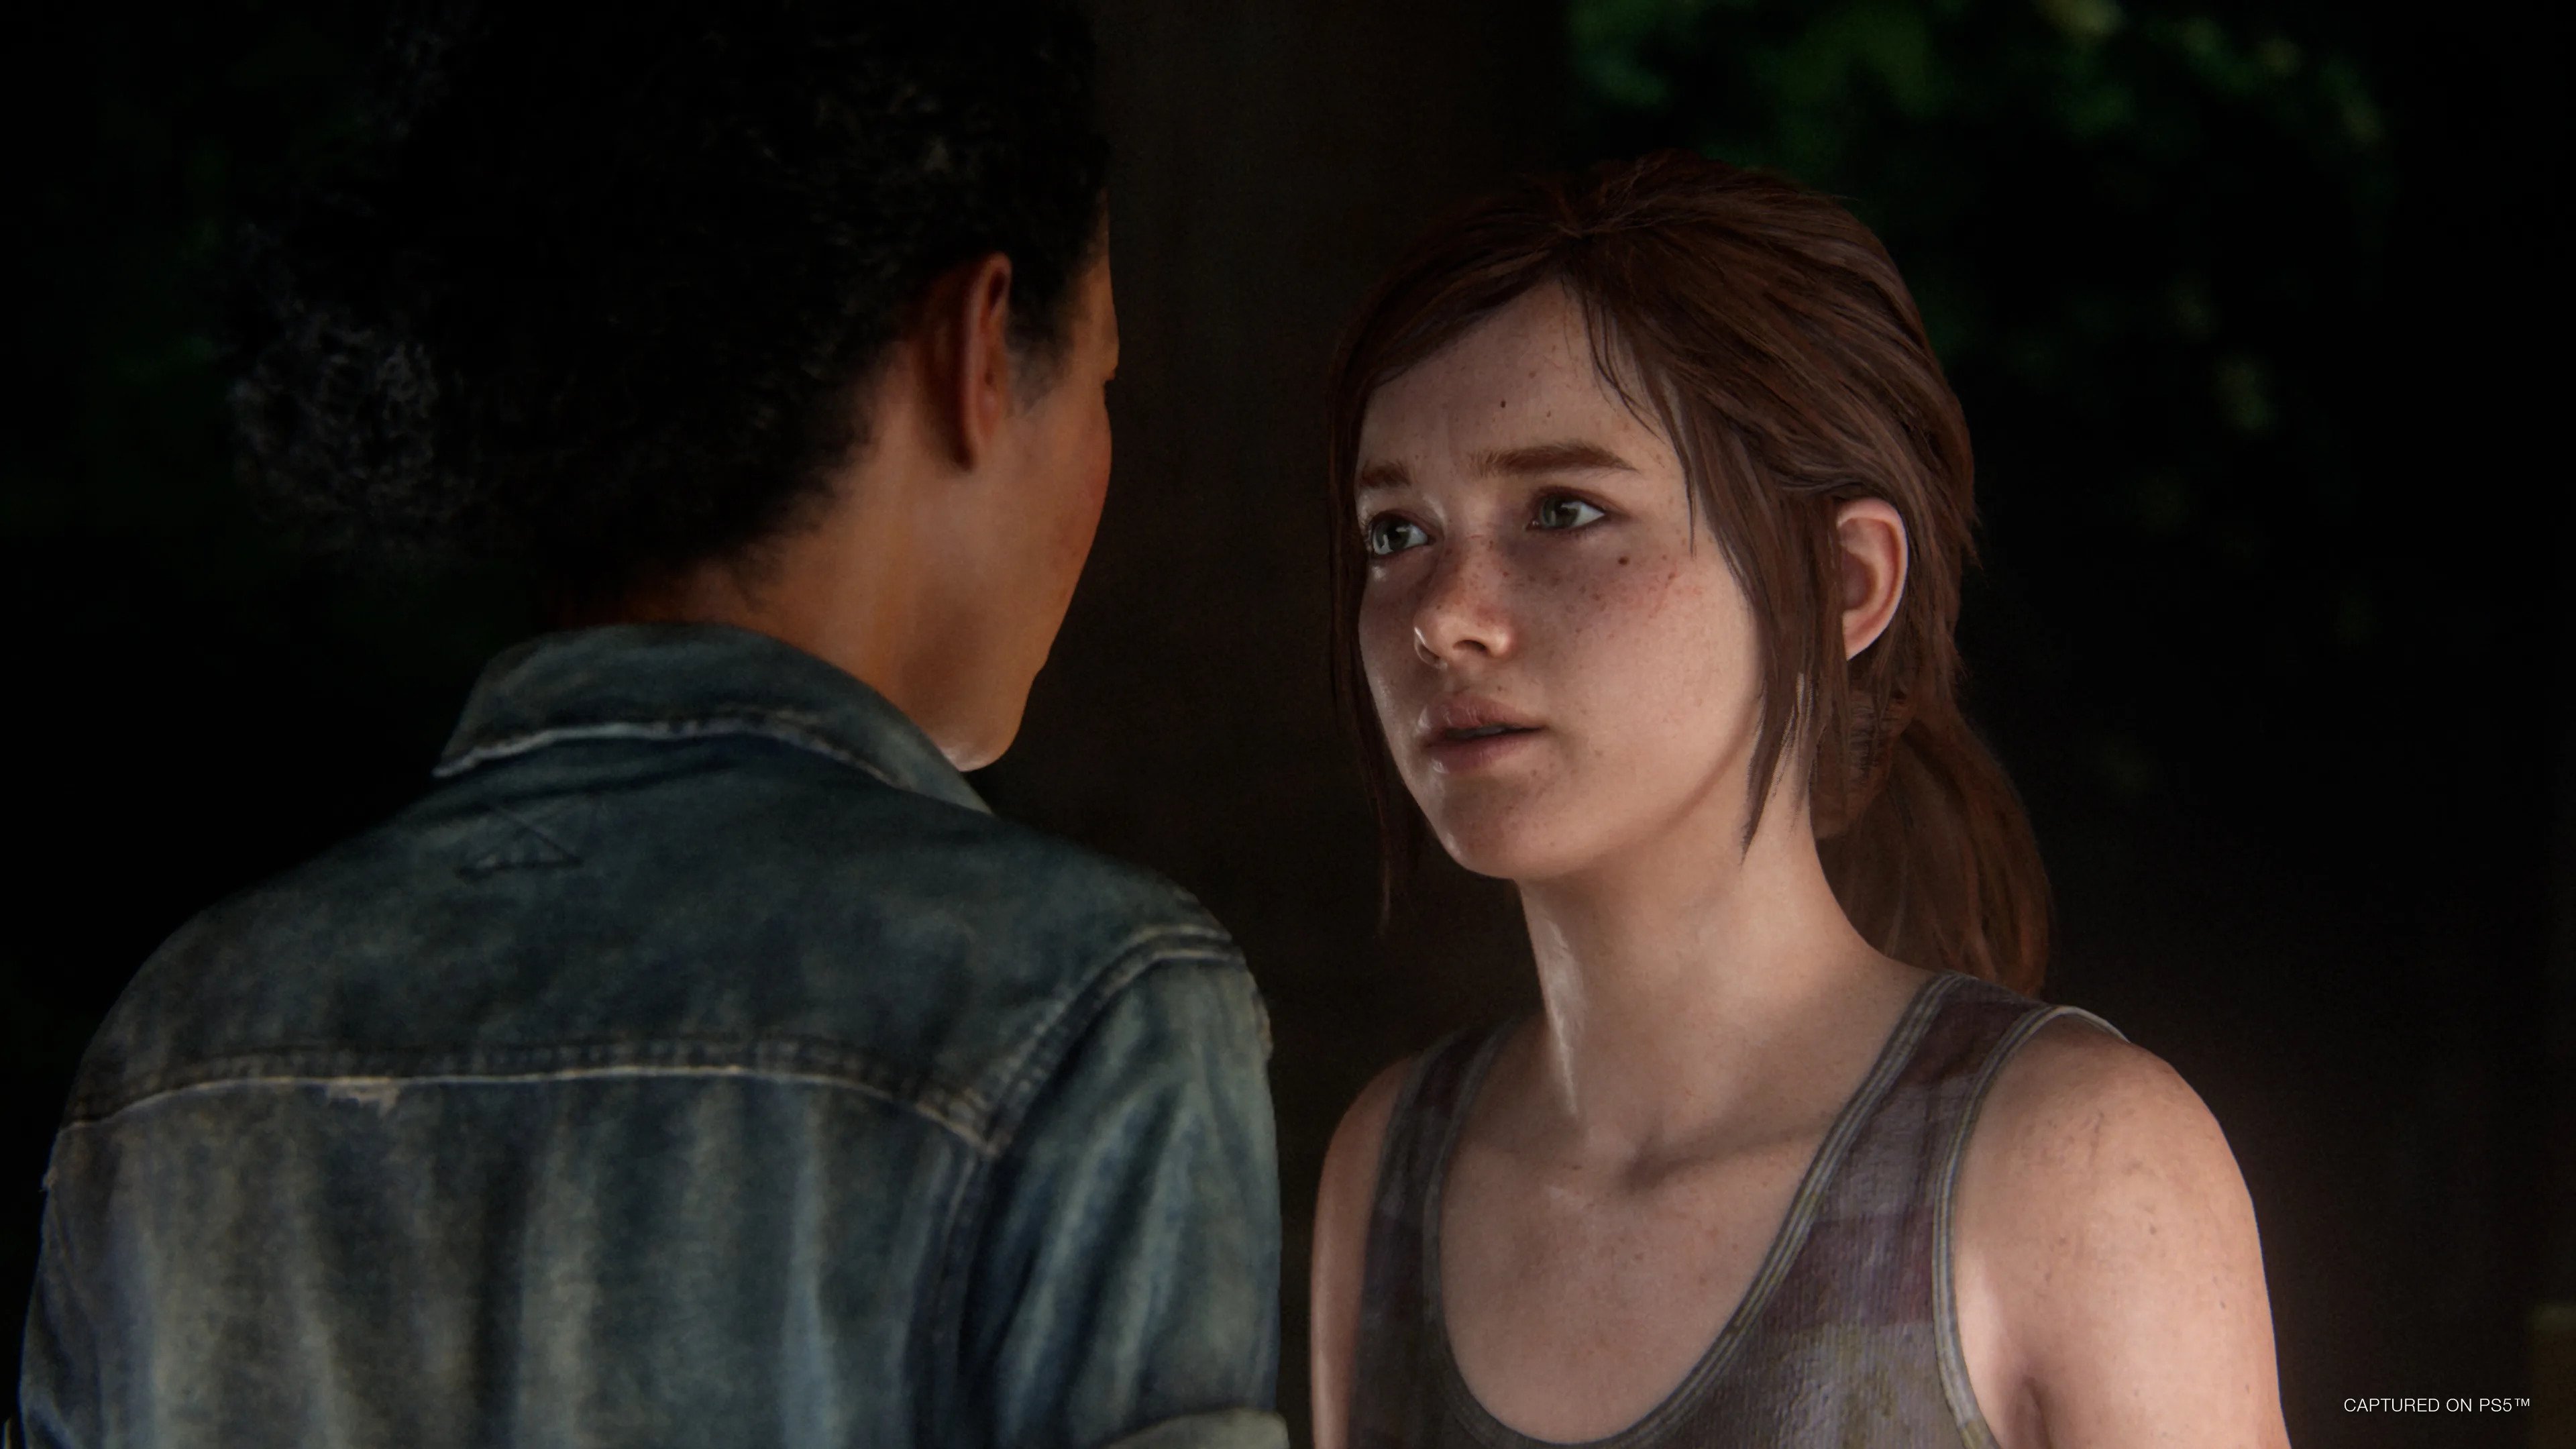 PS5/PC Remake Confirmed for The Last of Us 